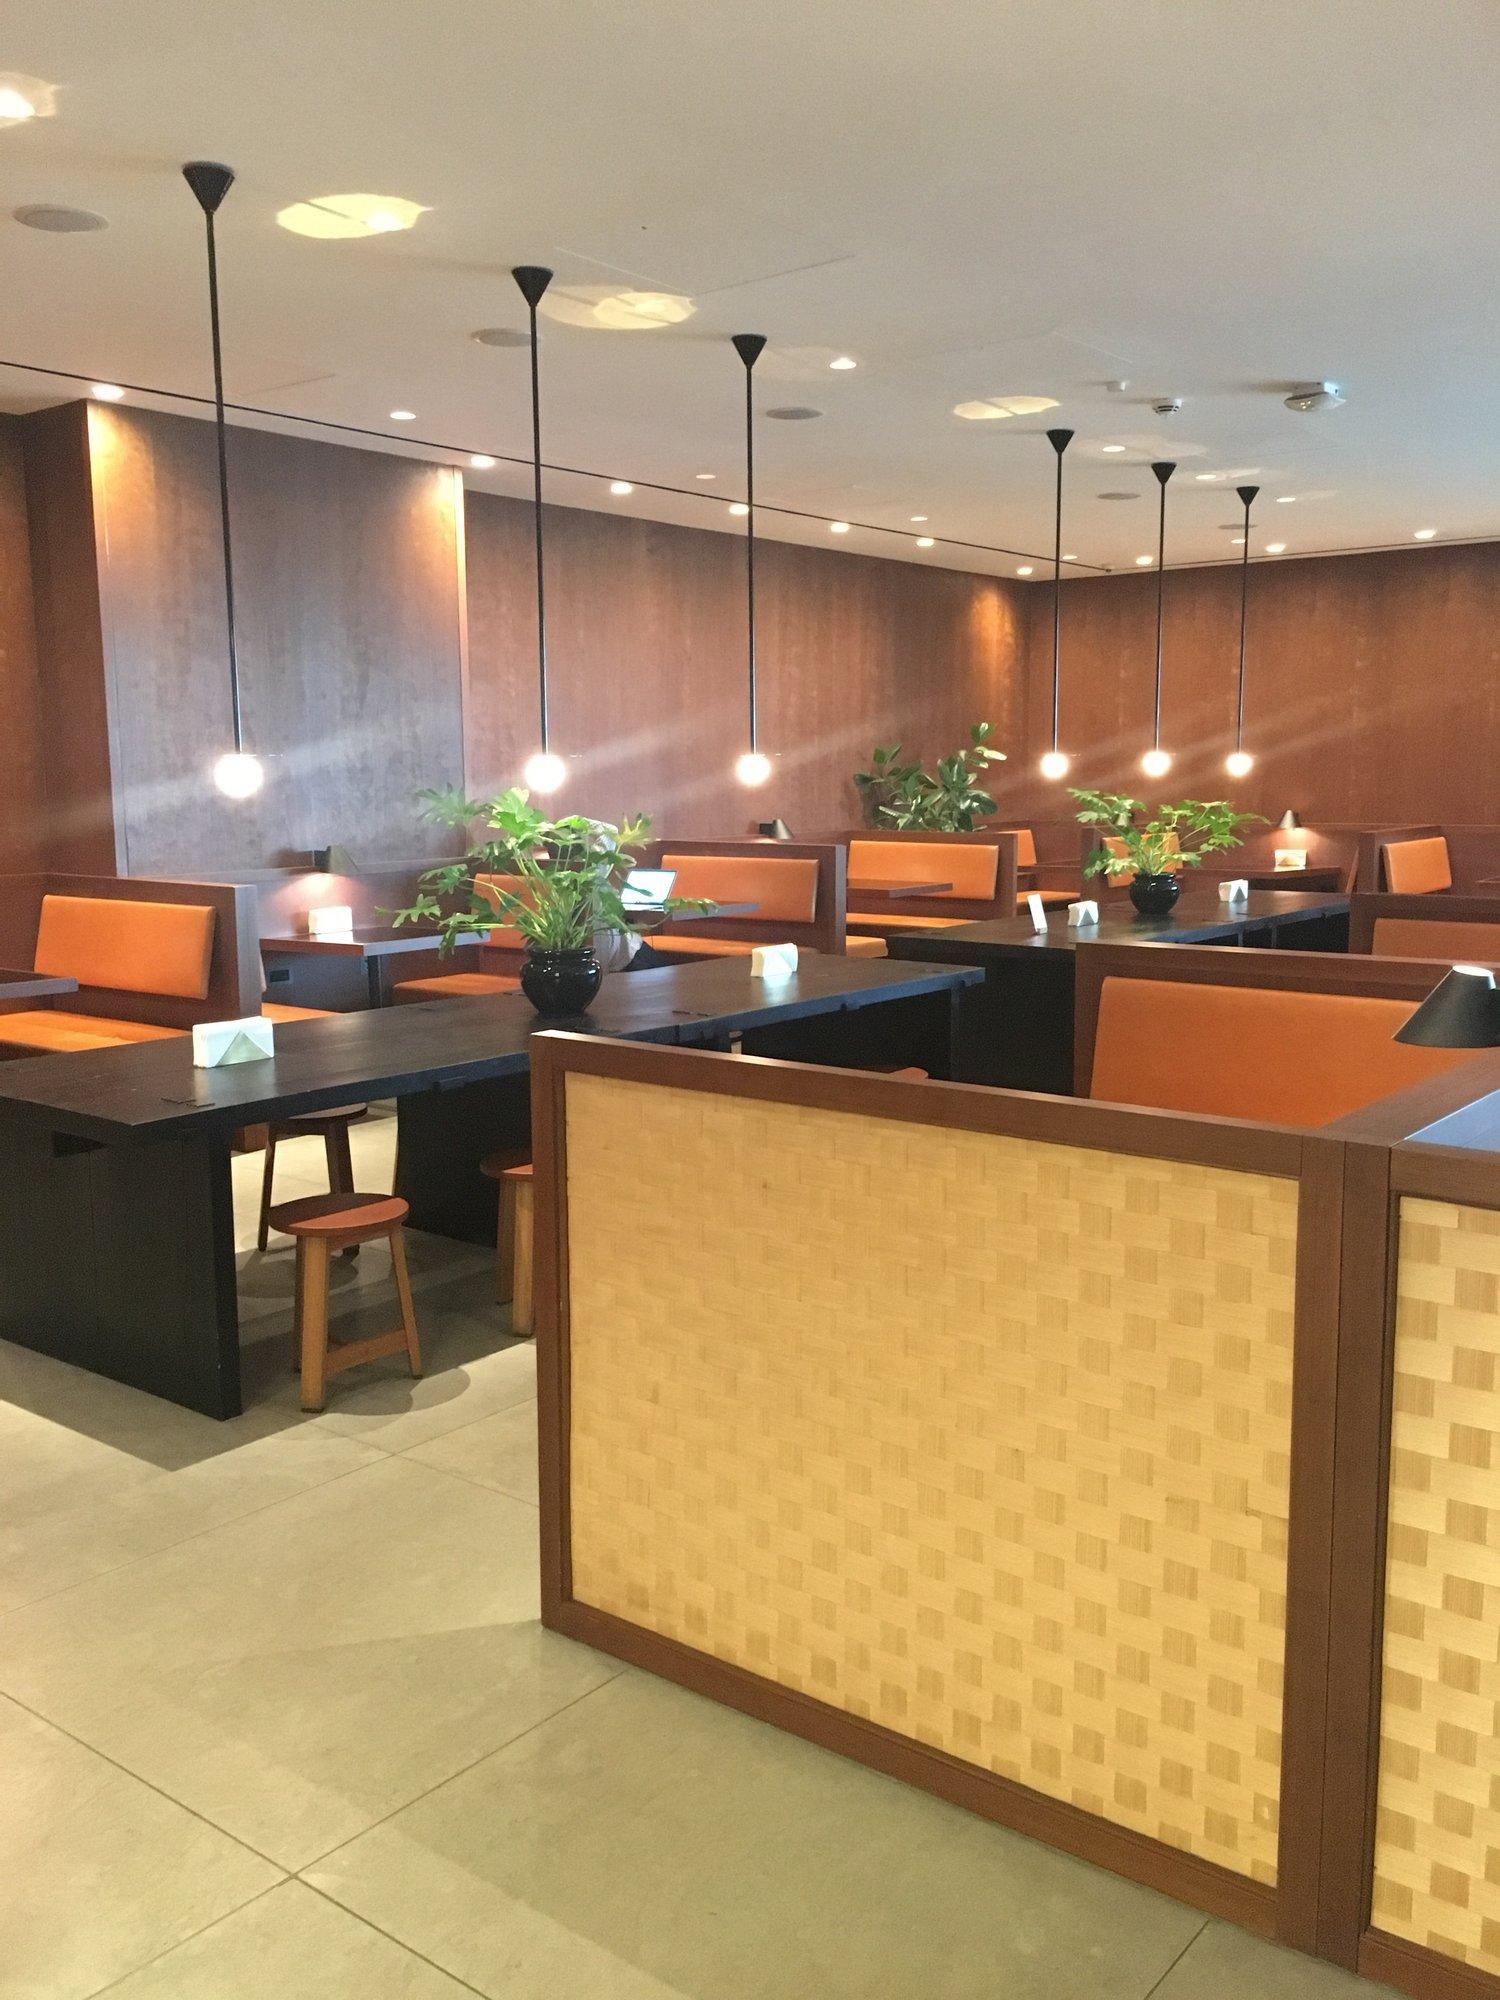 Cathay Pacific Business Class Lounge image 42 of 48